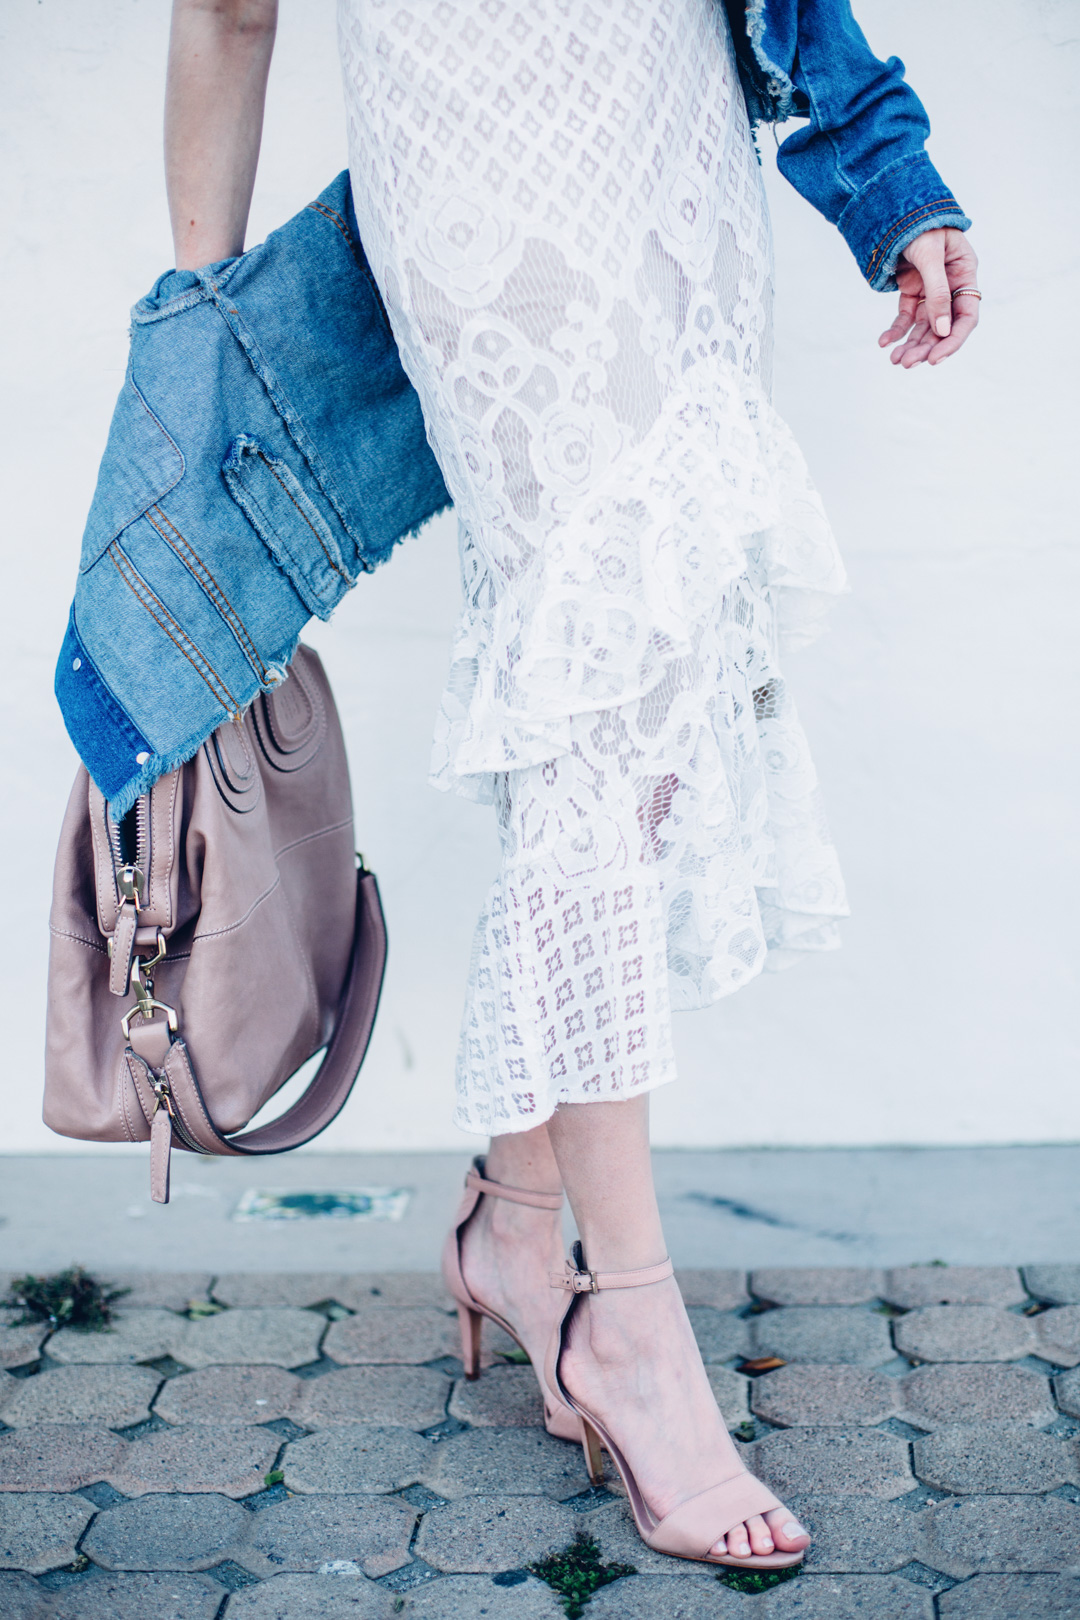 Jackie Roque styling a spring look in Malibu, wearing a Trouve Tiered Lace Midi Skirt, Trouve Surplice Cold Shoulder Bodysuit and a Market Miami denim jacket.